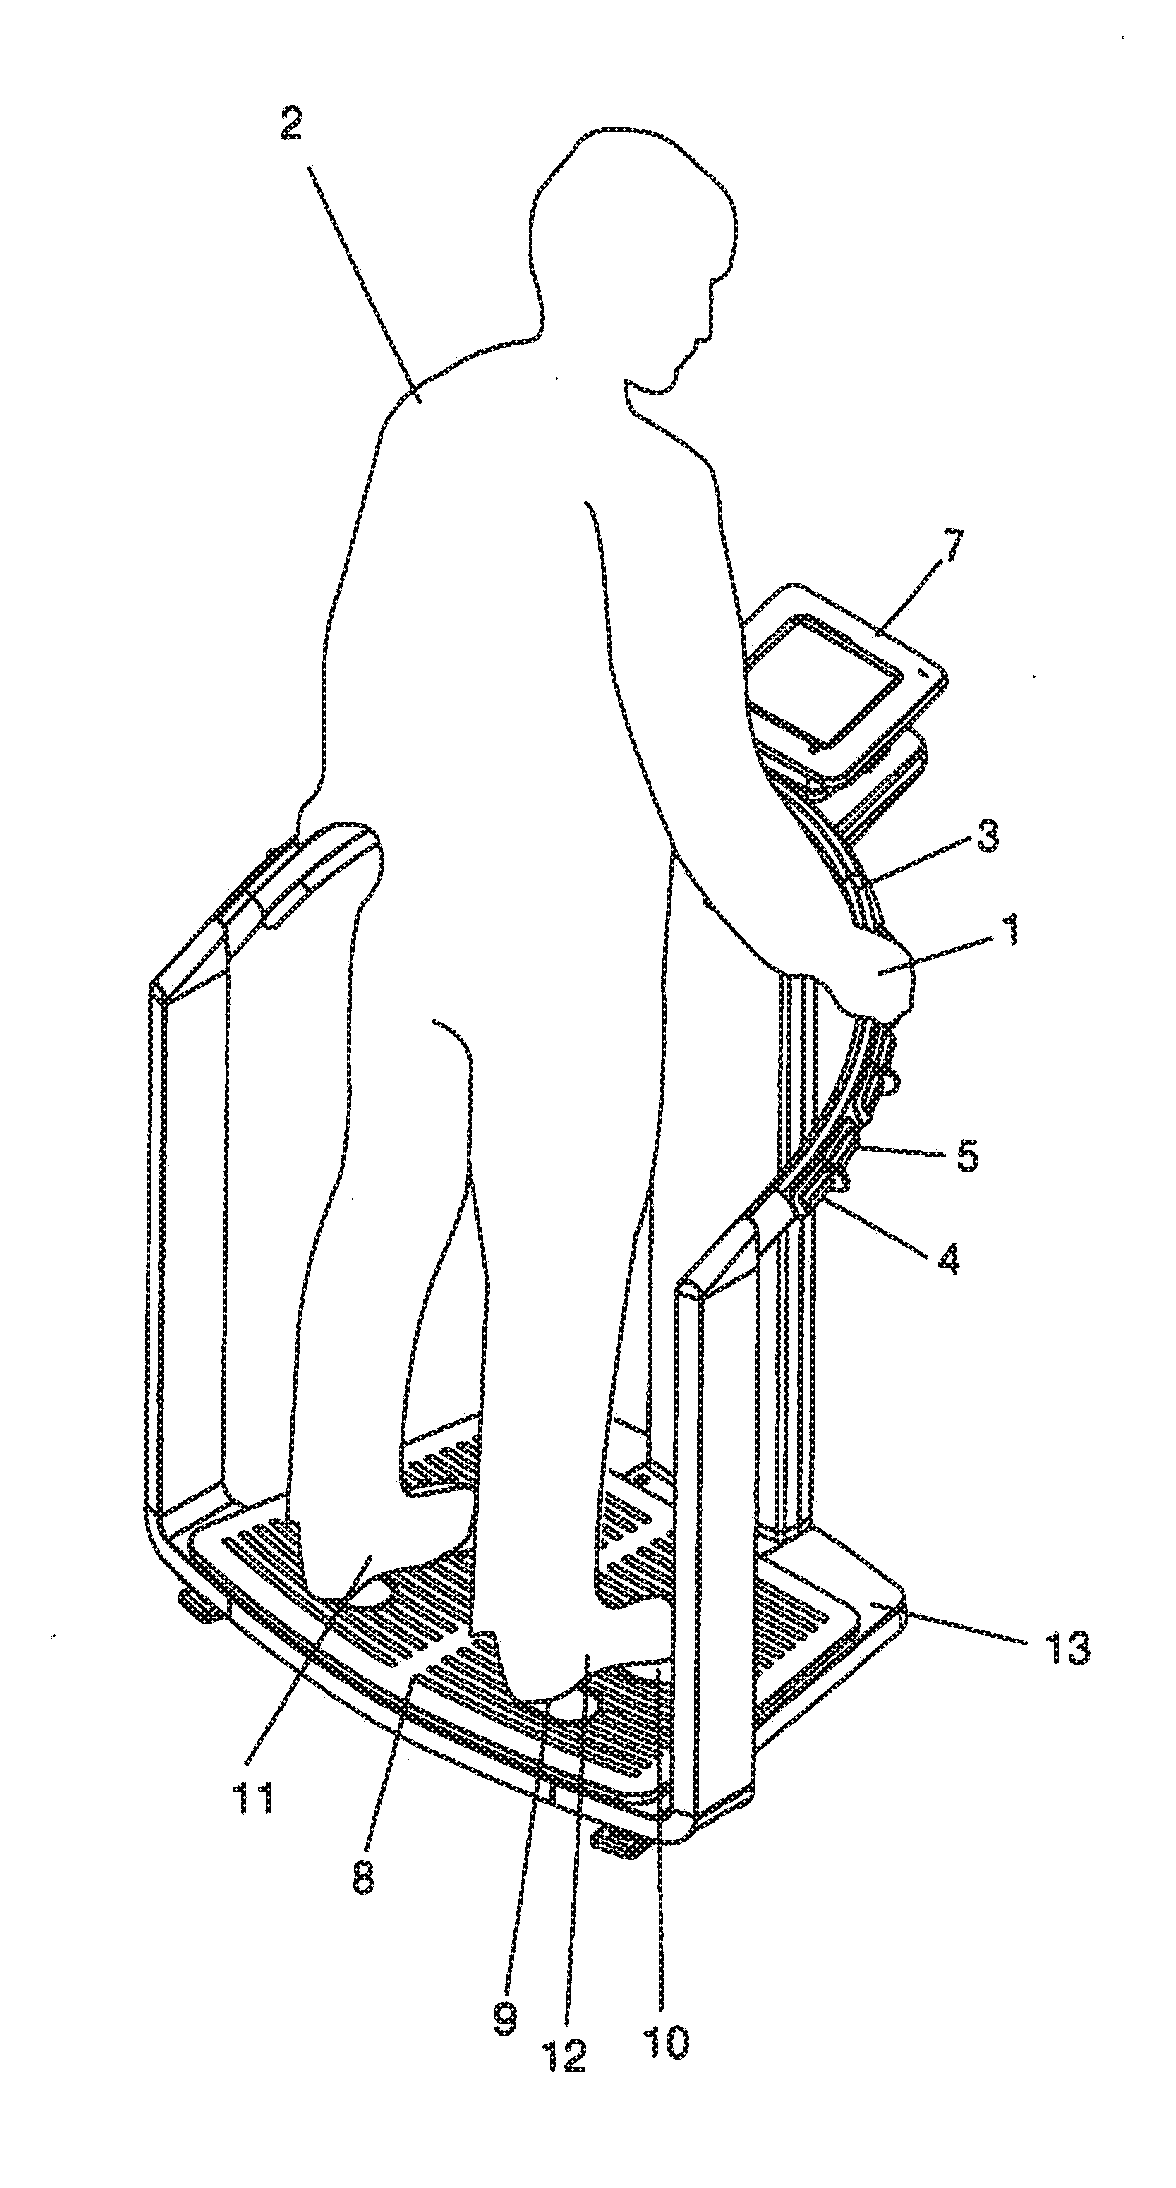 Method and apparatus for testing plausibility of measurement values in body composition analysis